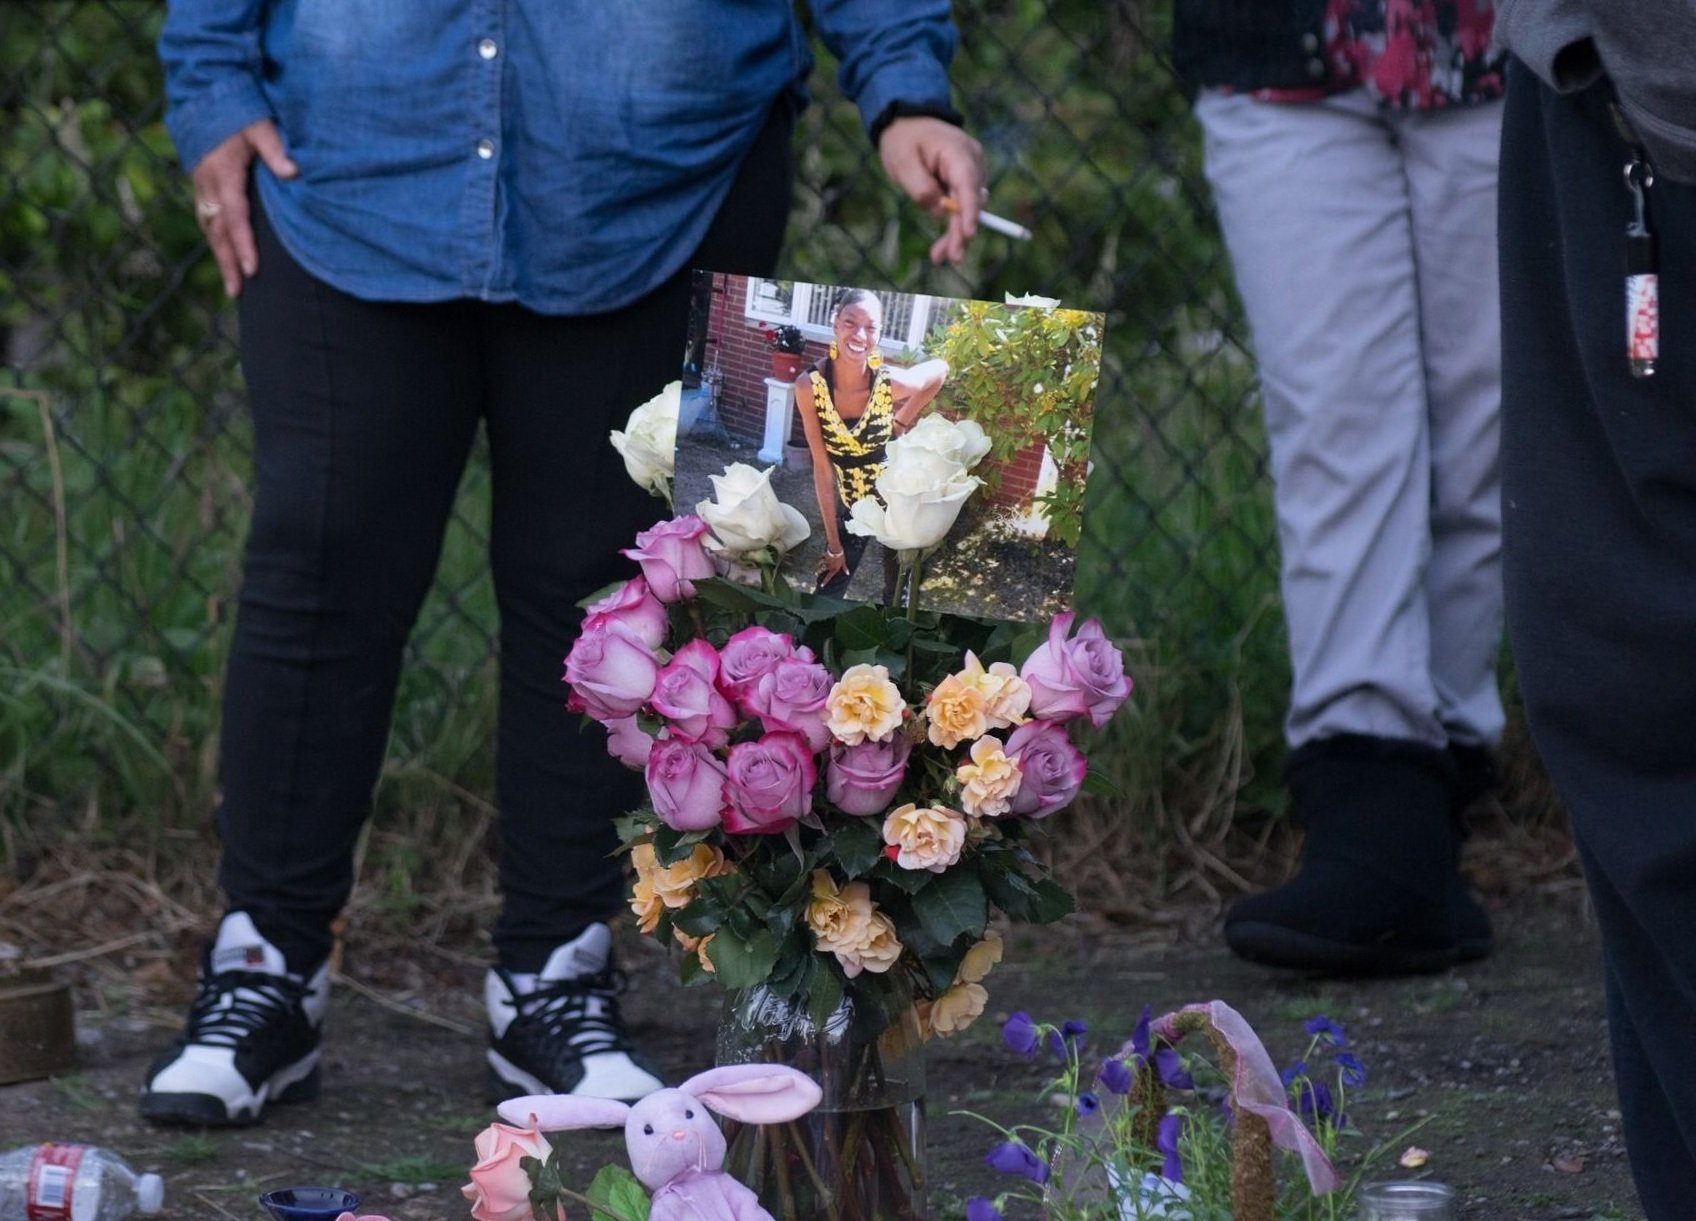  Community gathers around a memorial for Charleena Lyles just hours after her killing by a Seattle police officer. Lyles, a pregnant mother, had called 911 after suspecting a break-in.  